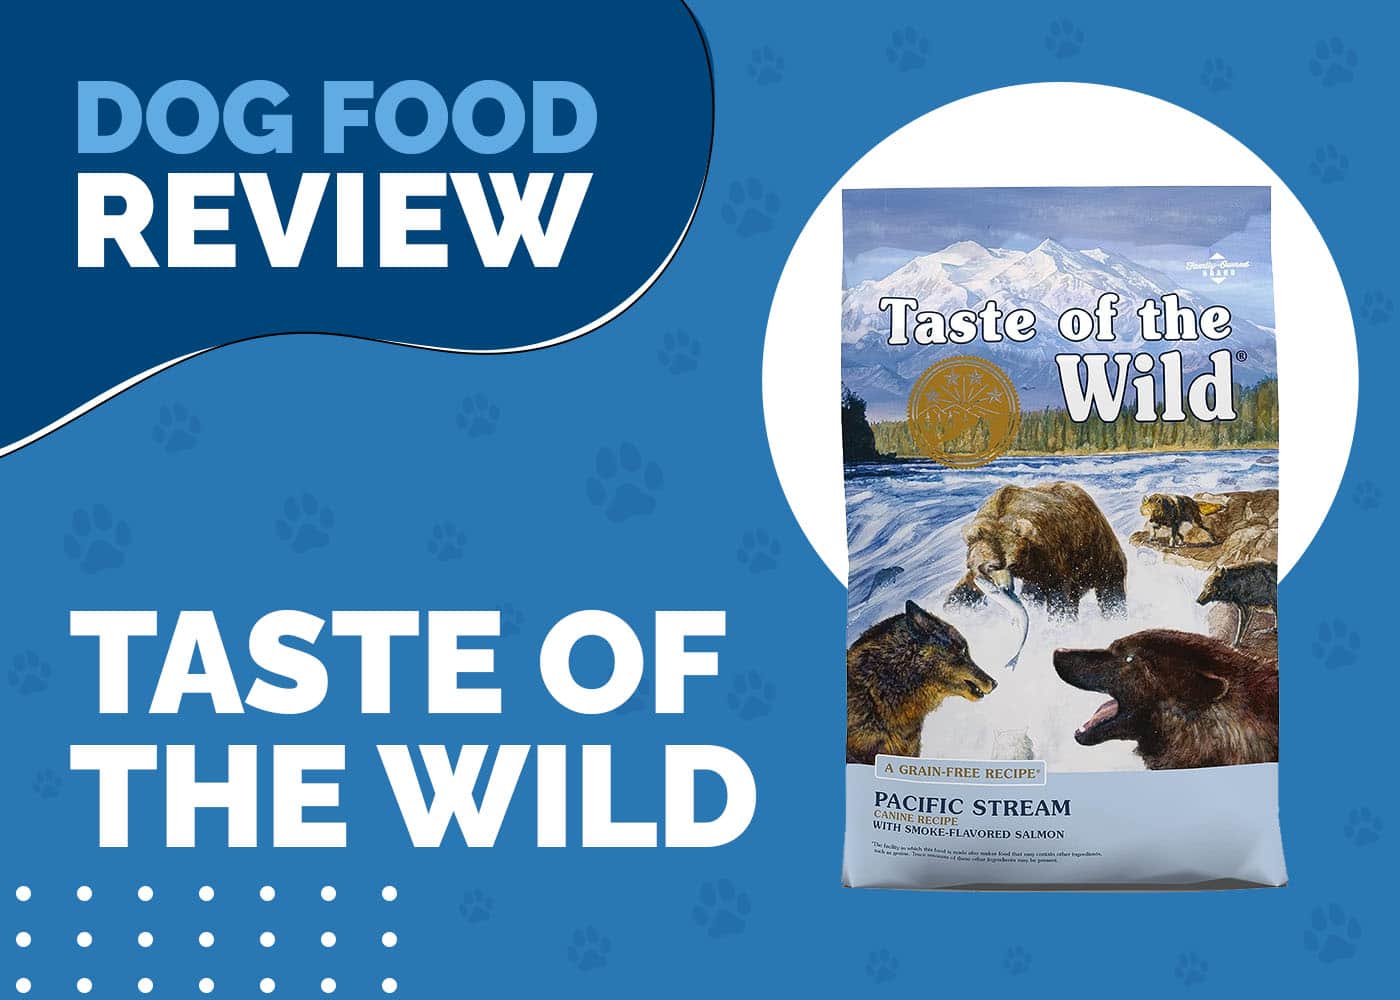 Taste of the Wild Pacific Stream Dog Food Review